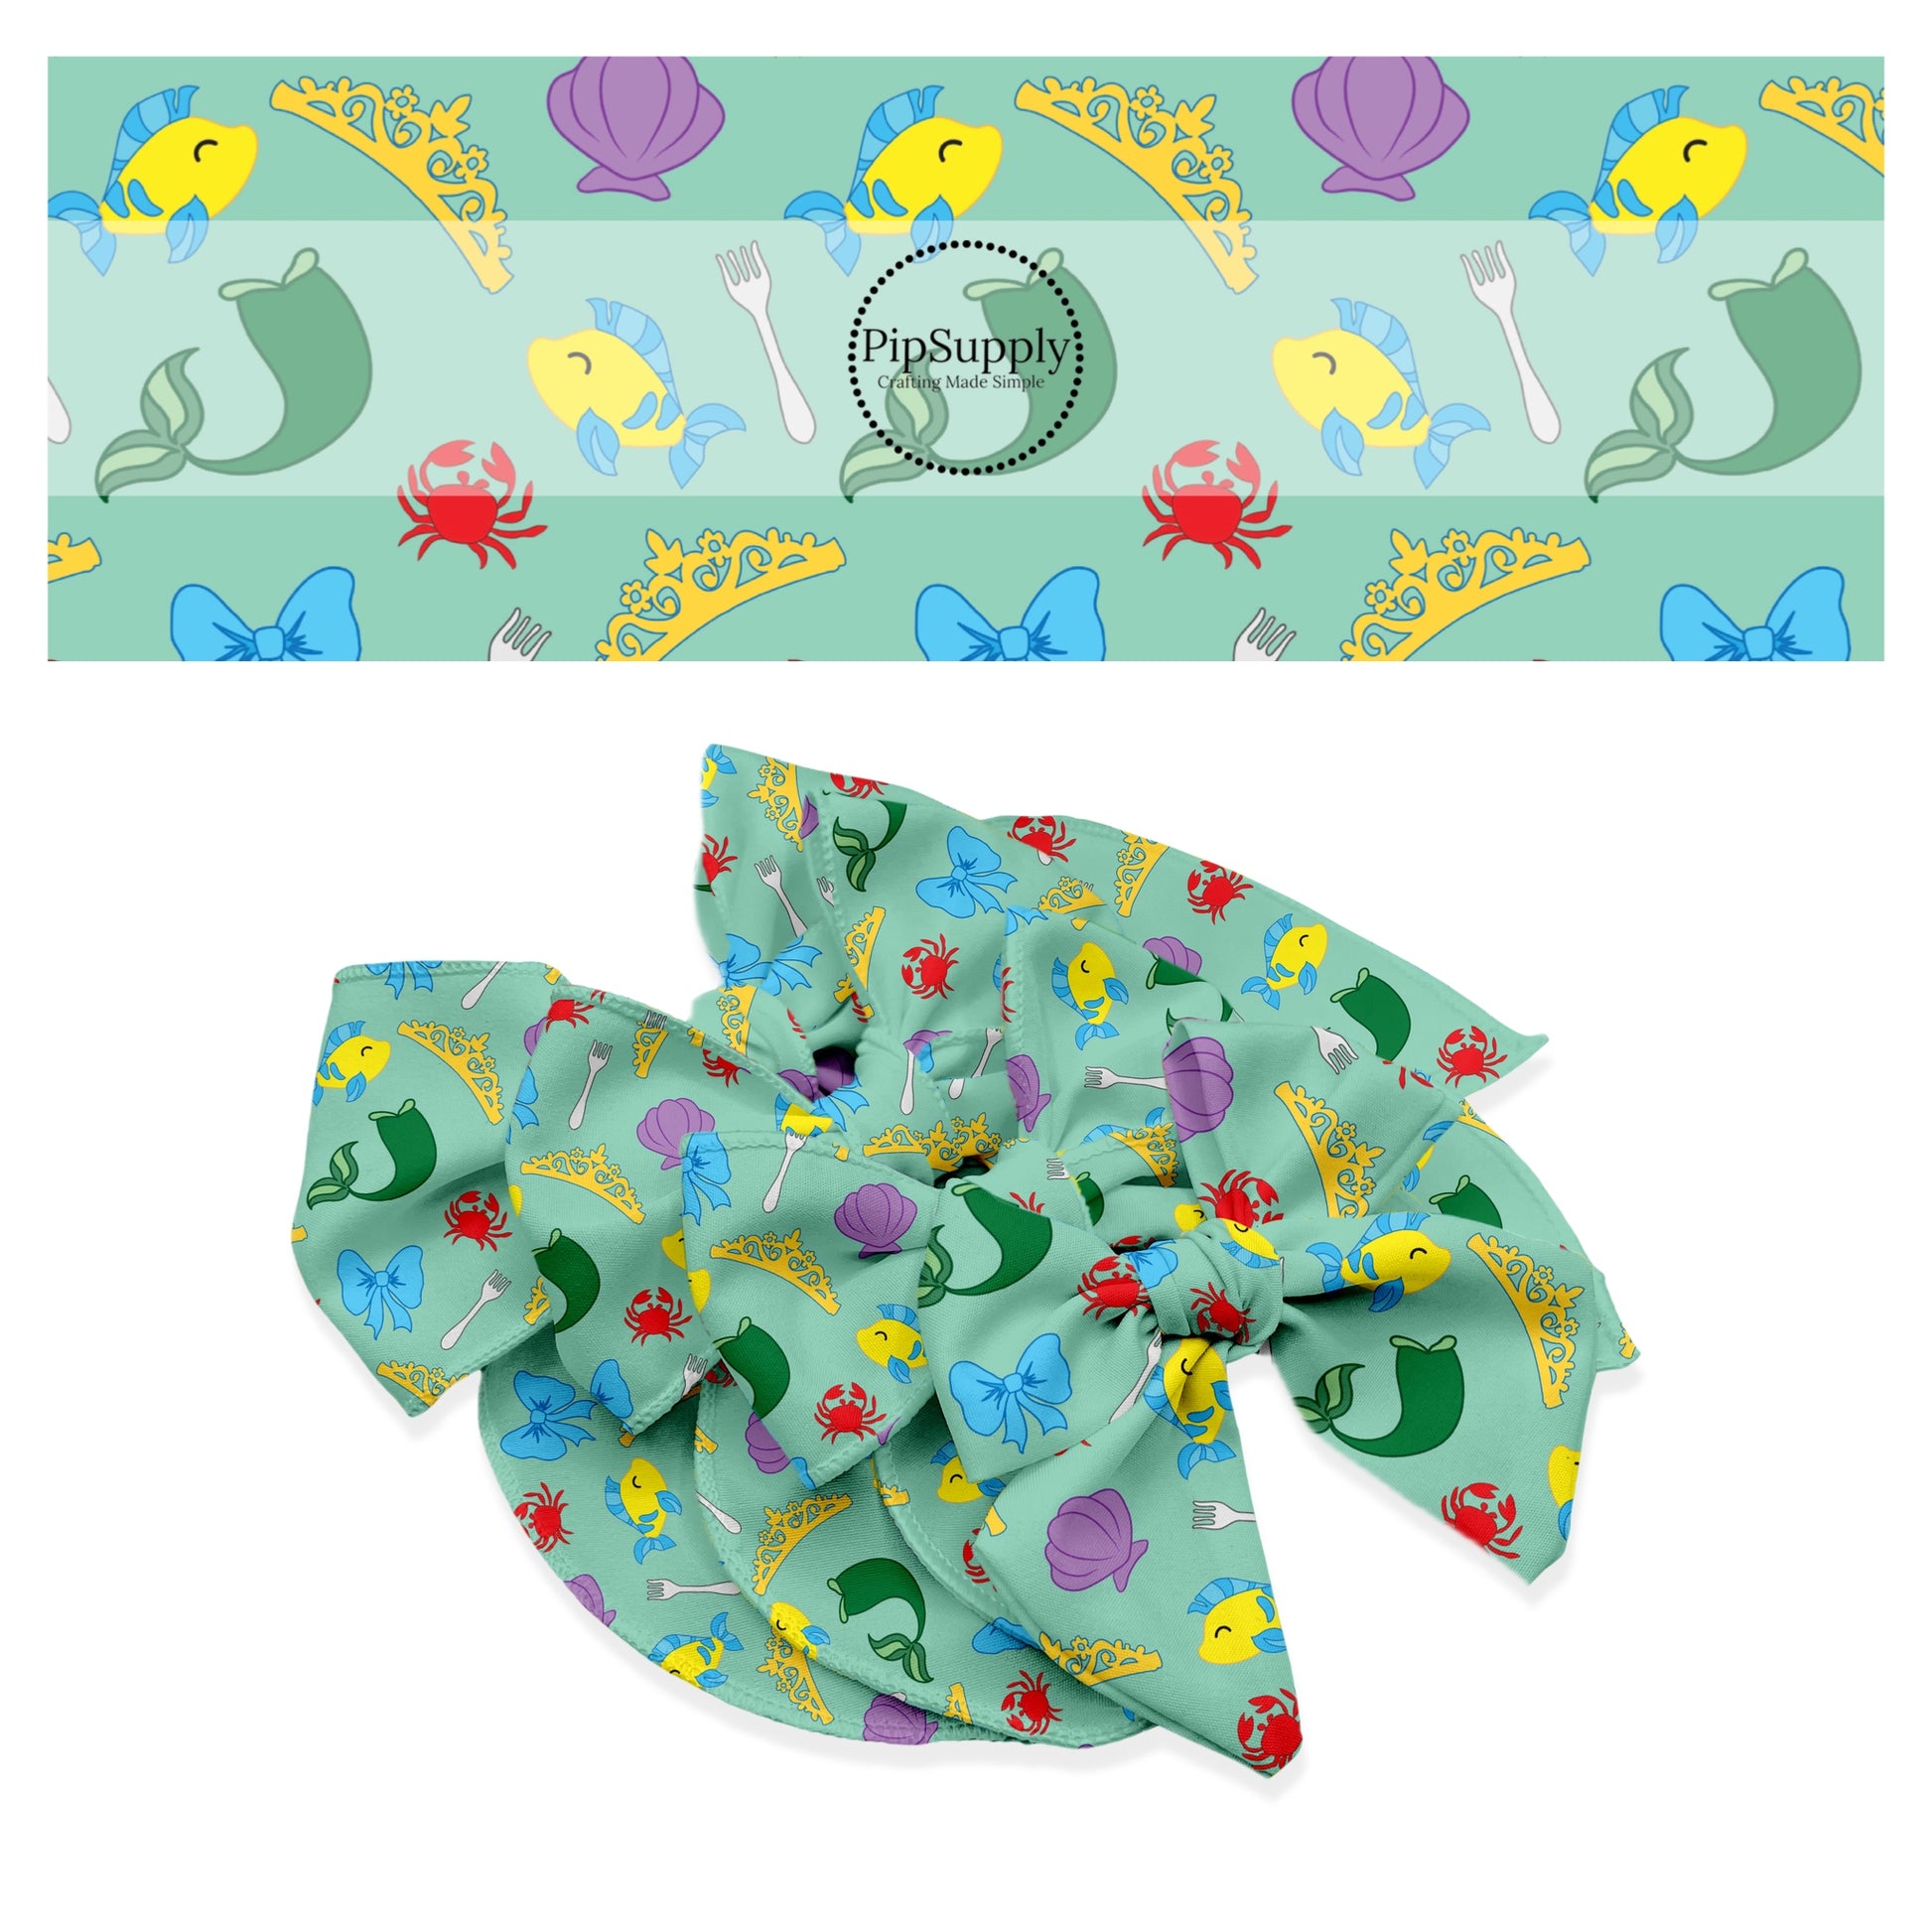 Yellow fish, crab, crowns, mermaid tail, seashell, and fork on green bow strips